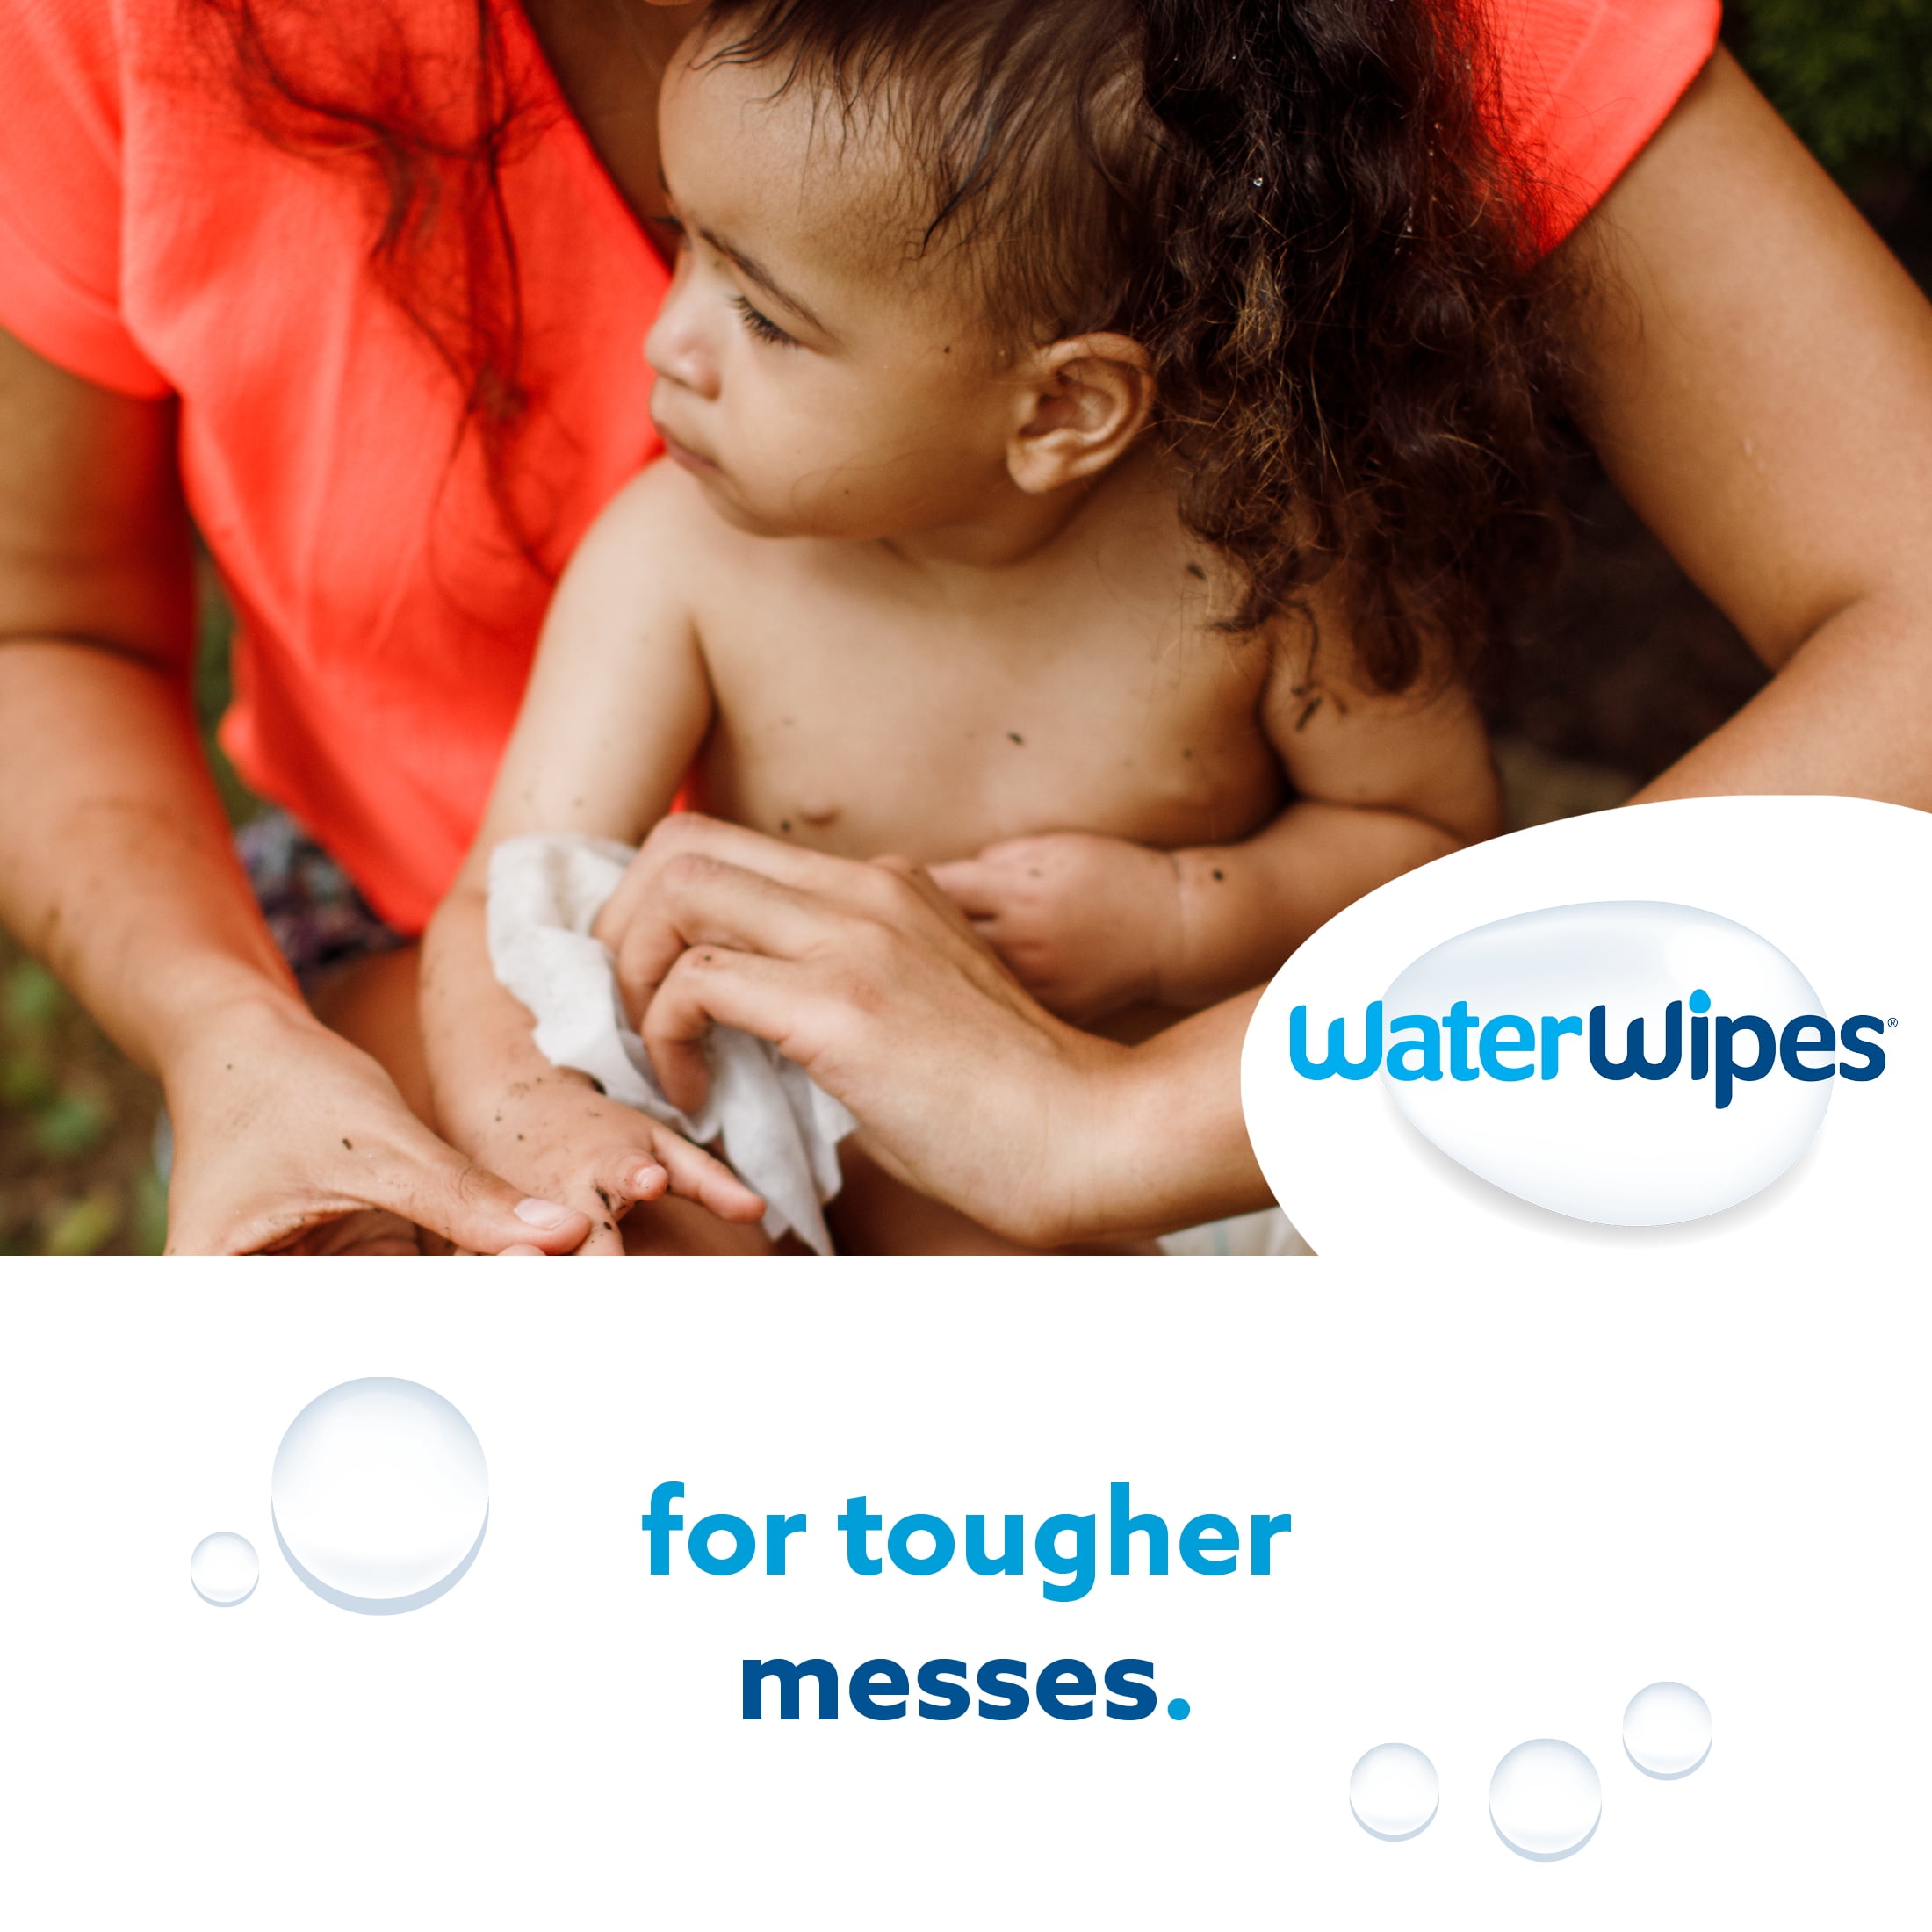 Waterwipes Plastic-Free Textured Clean, Toddler & Baby Wipes, 99.9% Water  Based